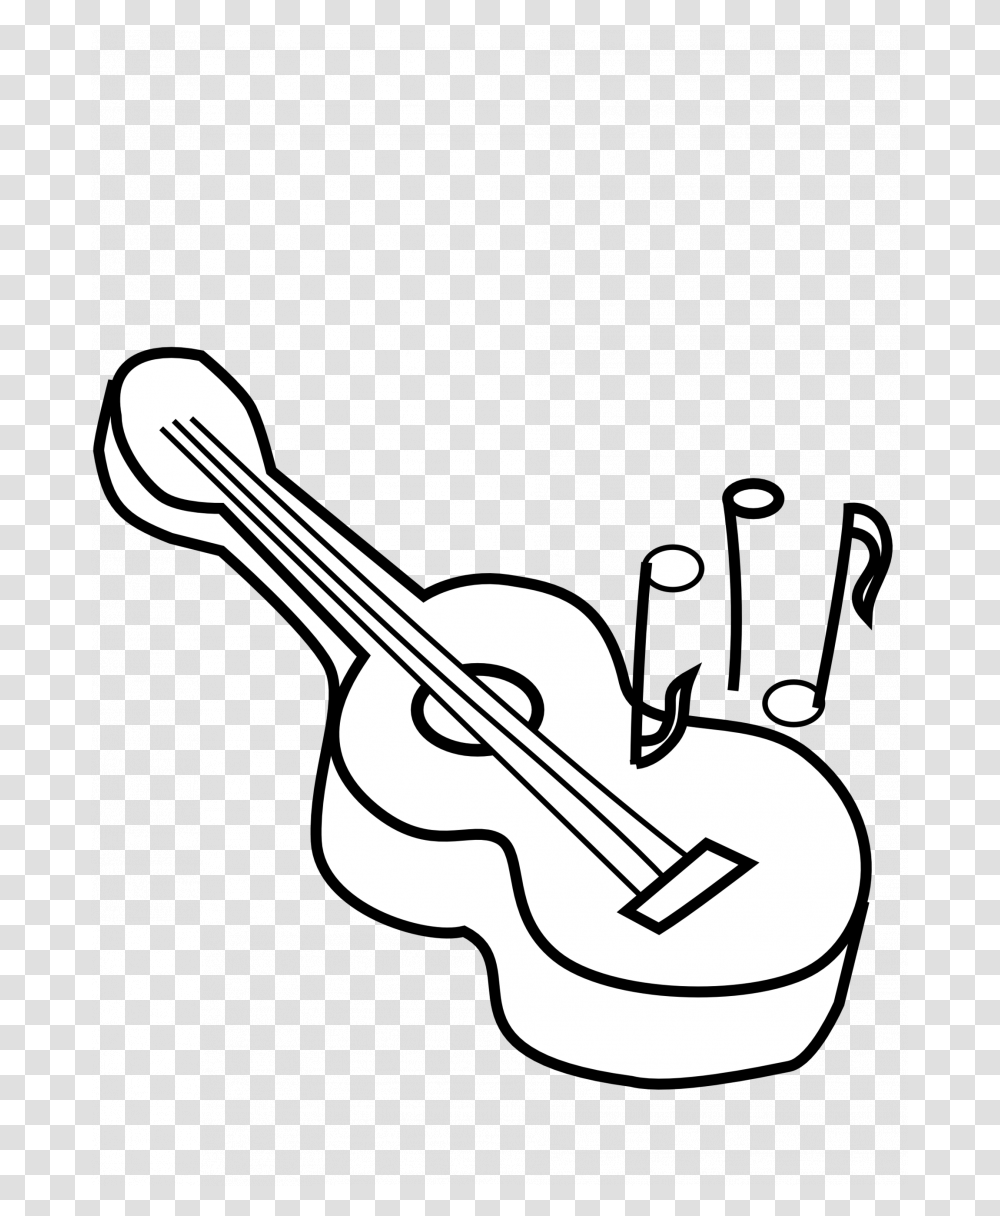 Guitar Clipart Black And White Guitar Clipart, Musical Instrument, Leisure Activities, Cello, Violin Transparent Png